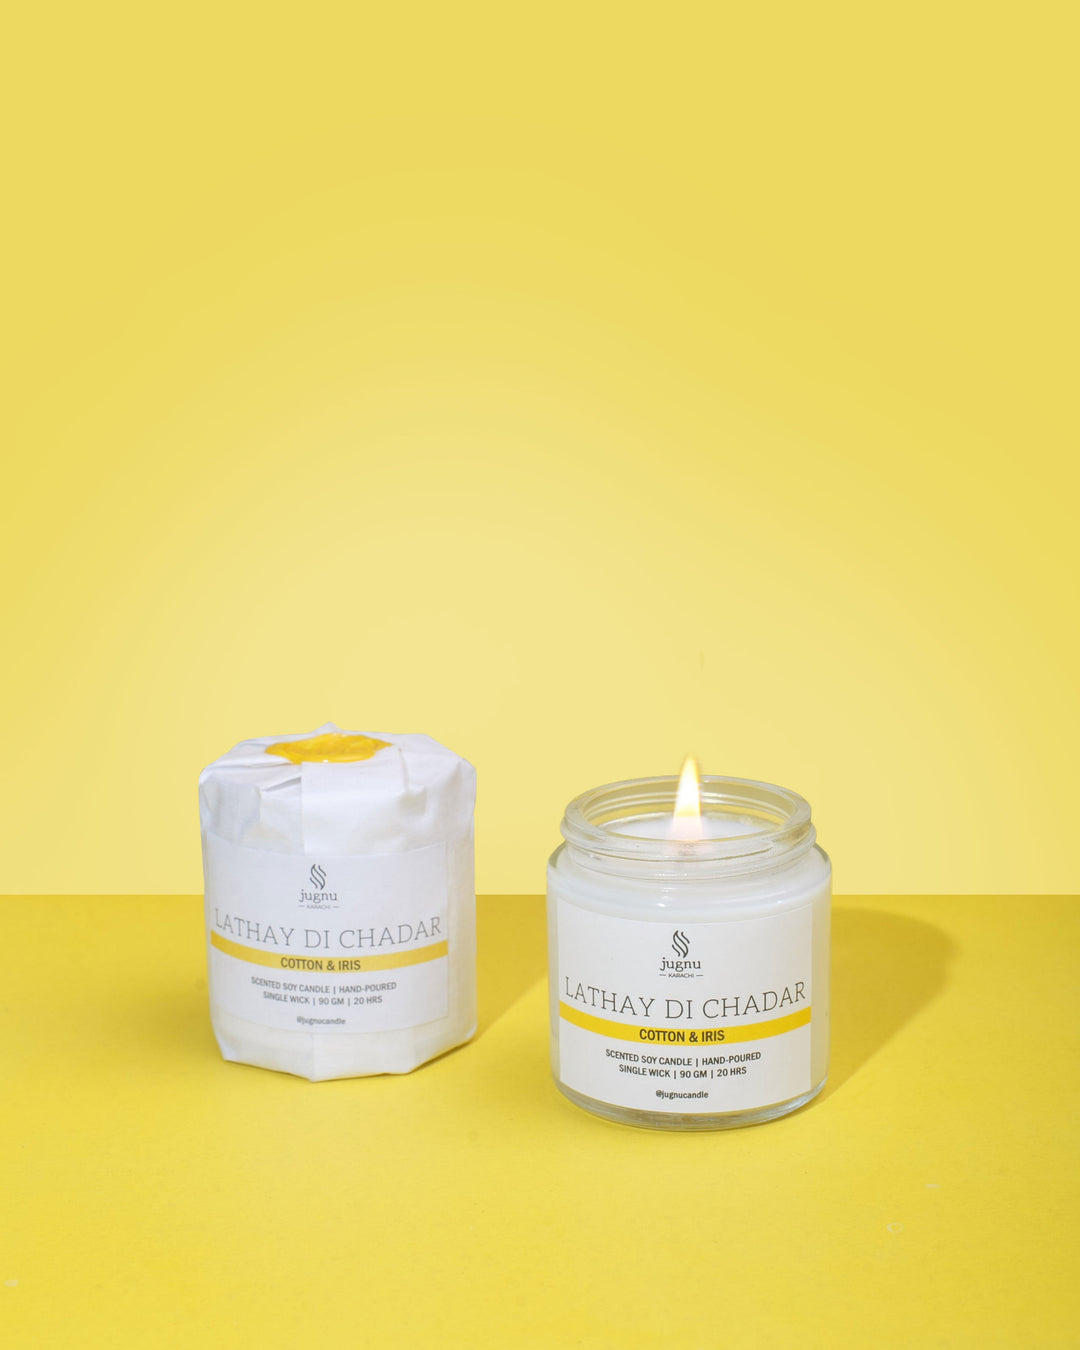 Lathay Di Chadar (Cotton & Iris) - Scented Soy Candle